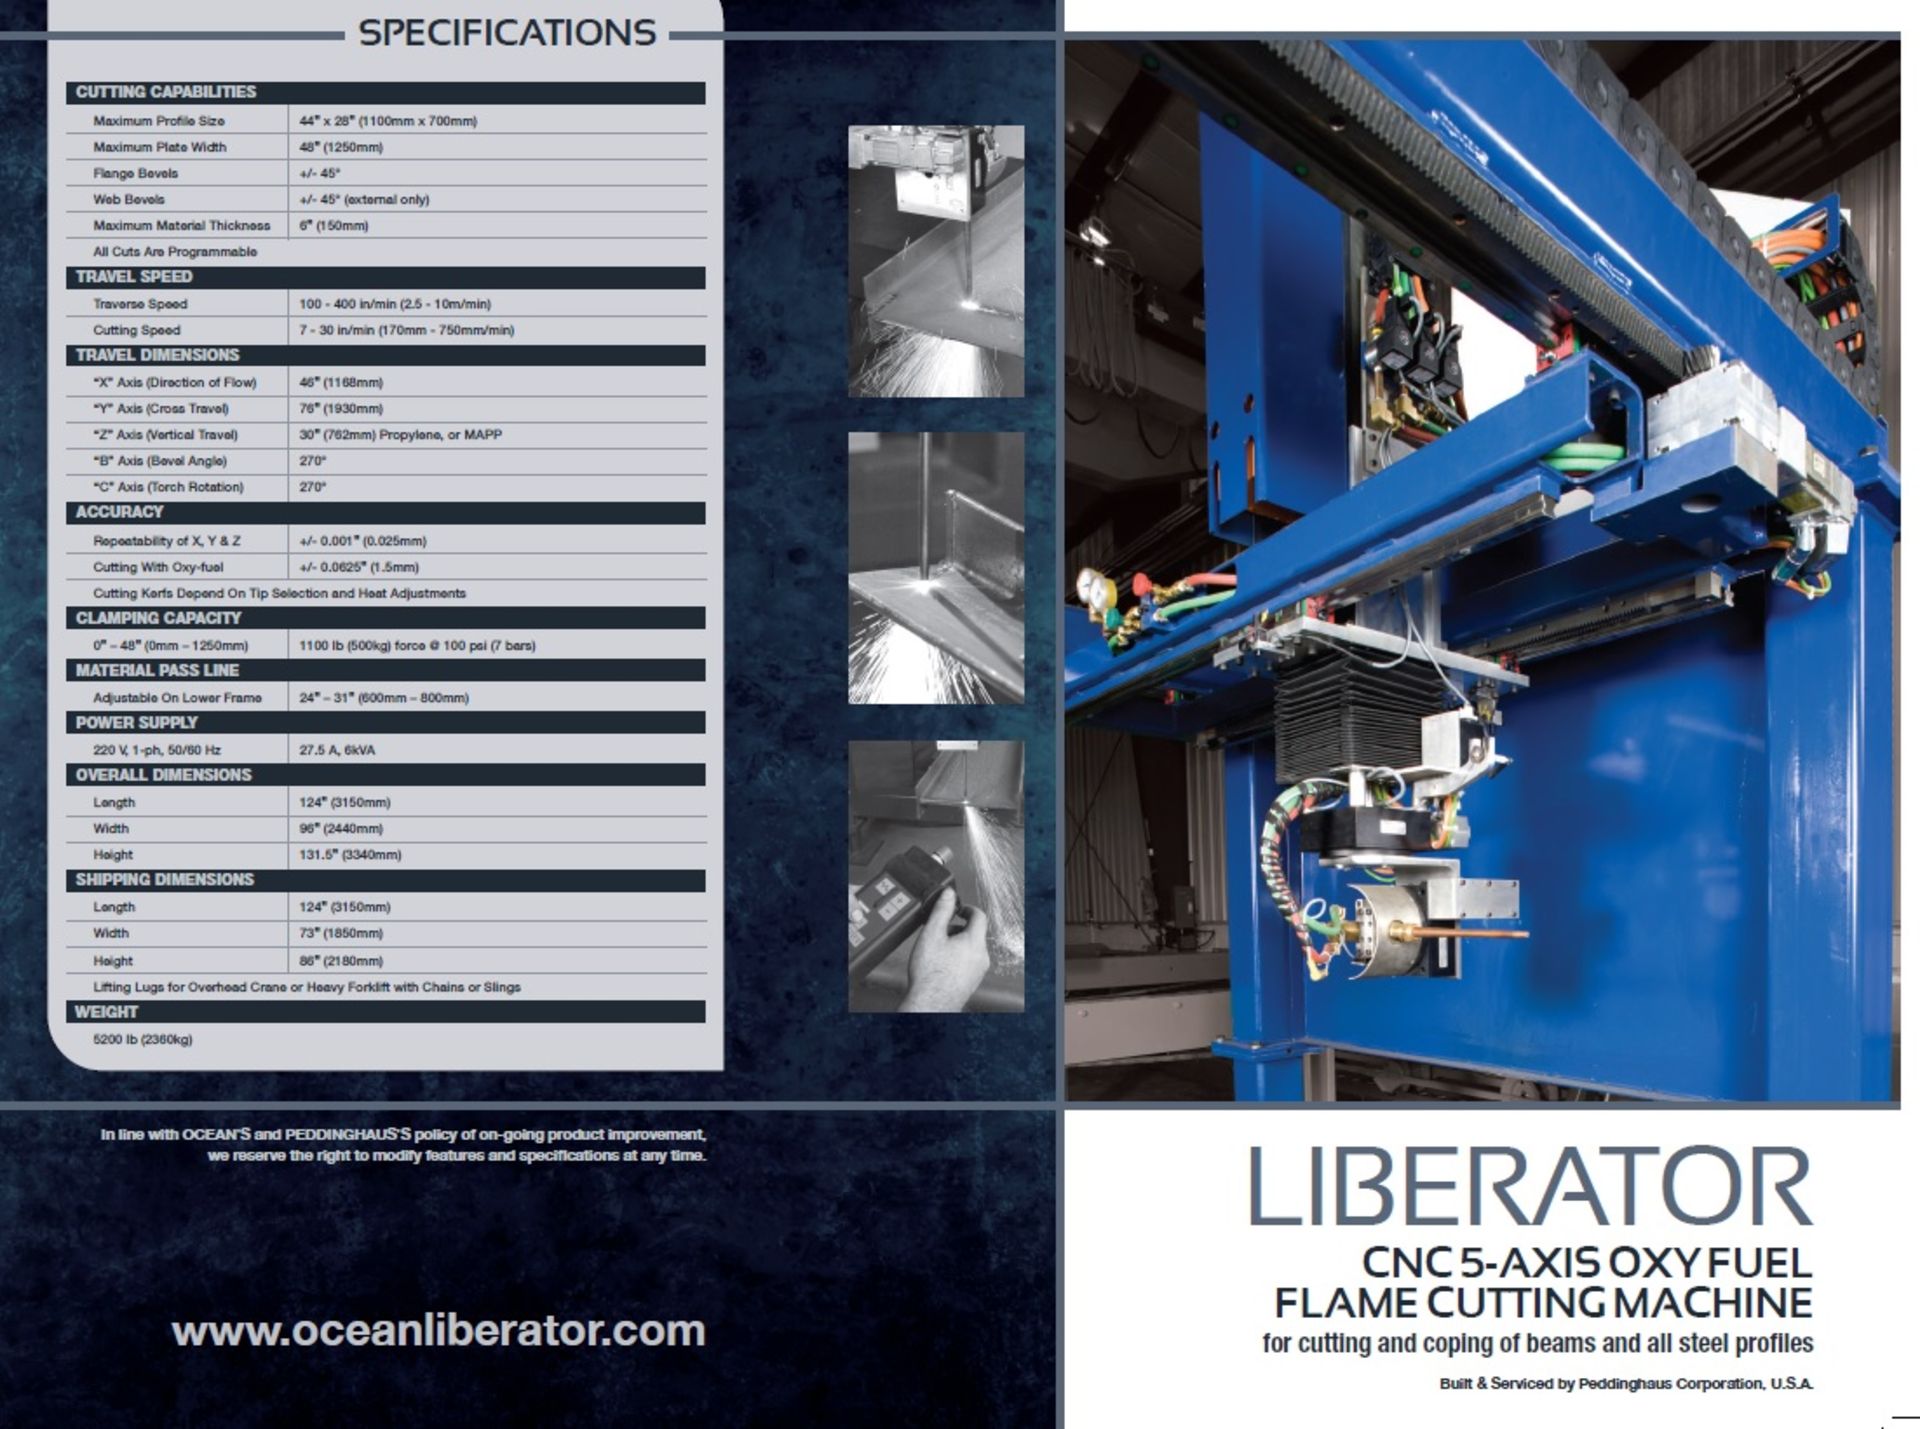 PEDDINGHAUS/OCEAN MACHINERY LIBERATOR CNC 5-AXIS OXY FUEL FLAME CUTTING MACHINE, New 2012 - Image 10 of 11